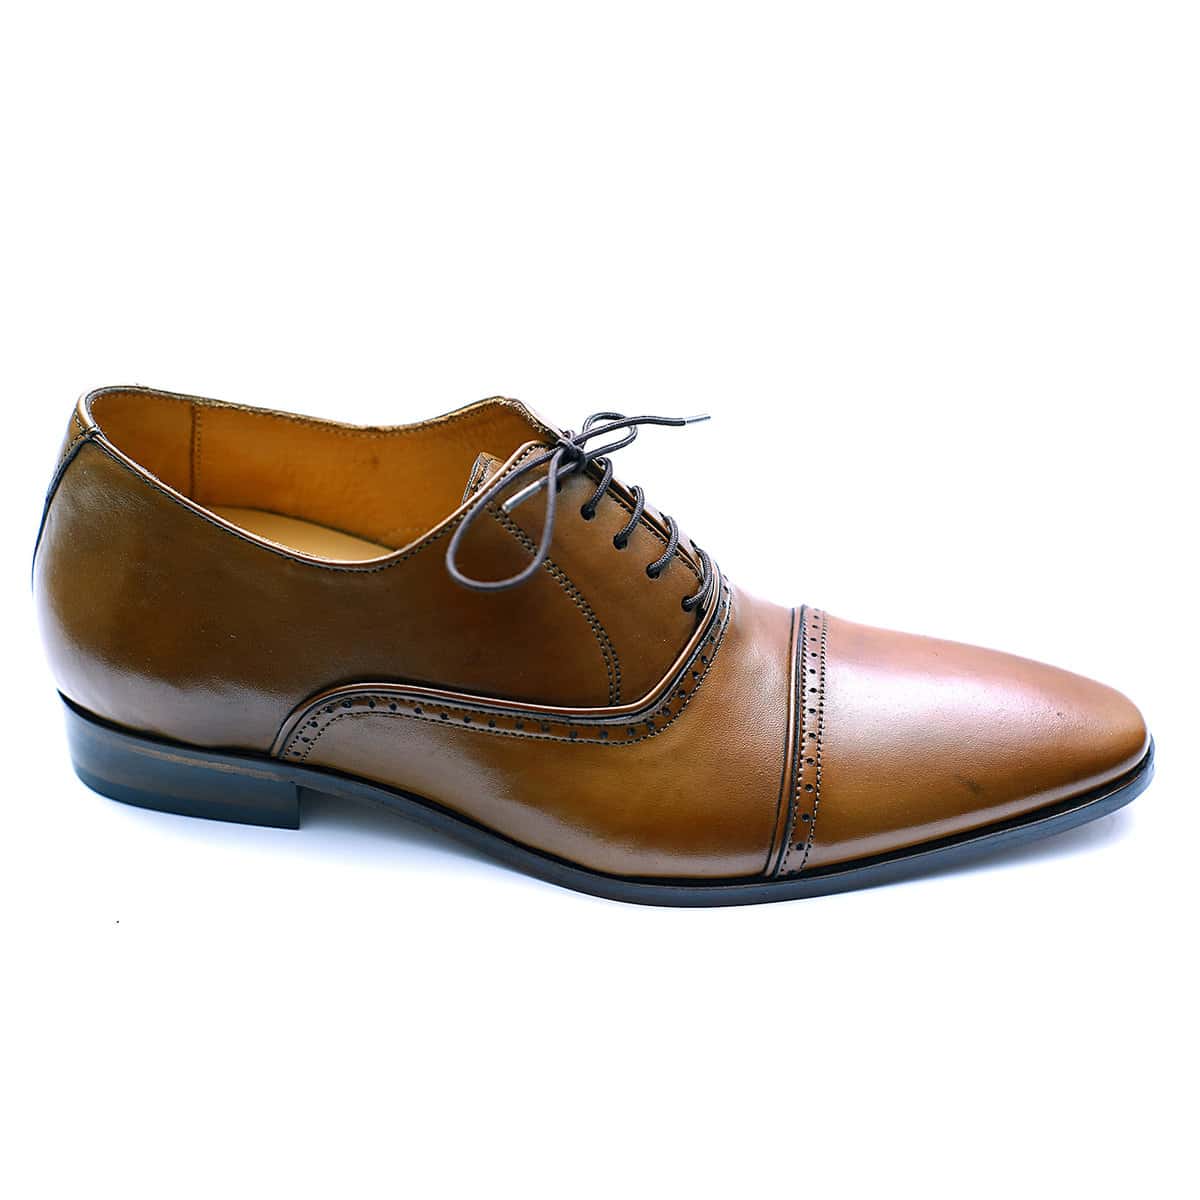 Aft11x – Tan Leather Shoes – 6.5 Cm Taller